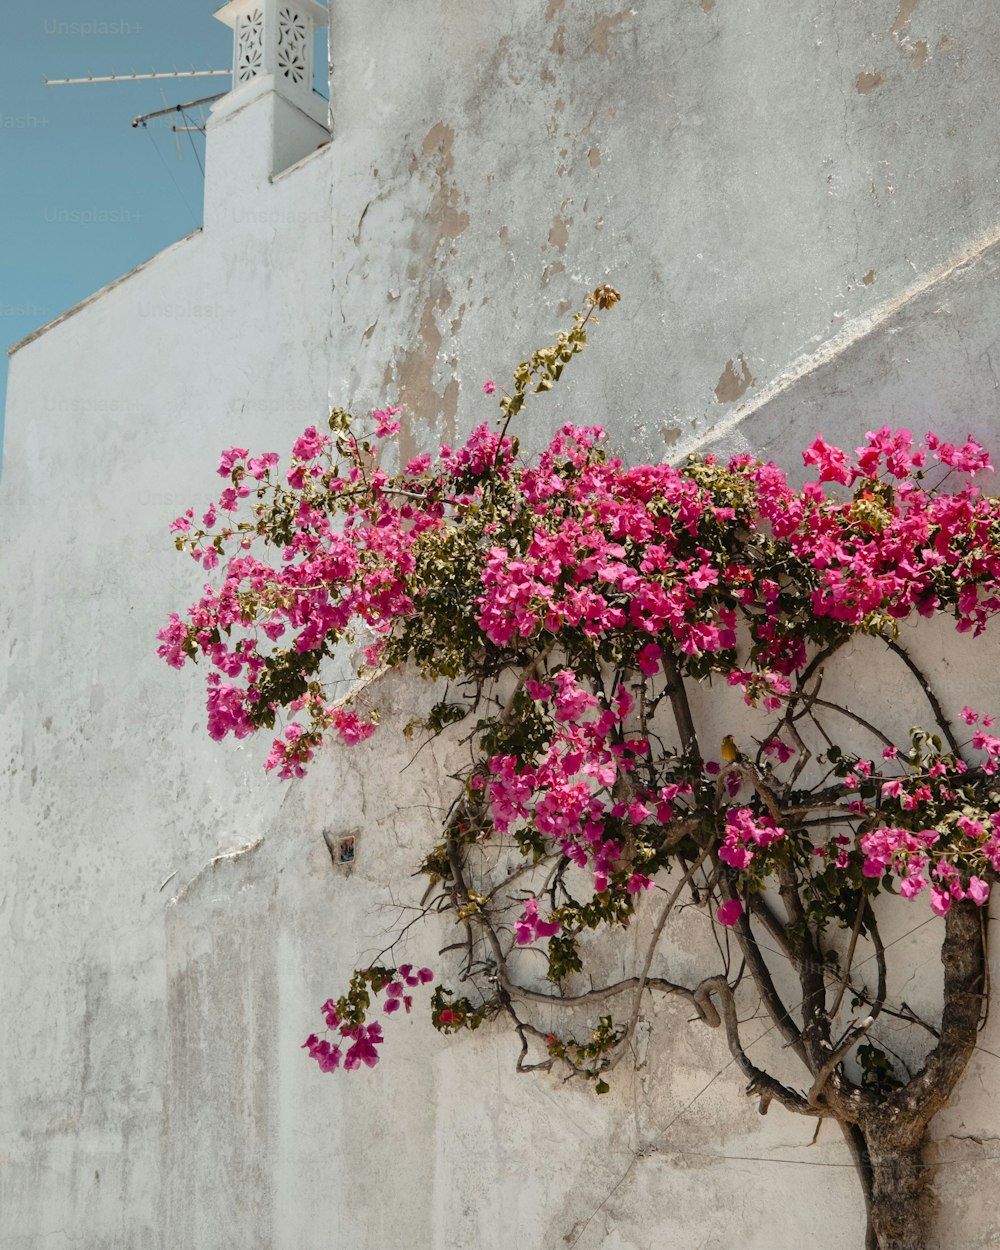 pink flowers growing on the side of a building